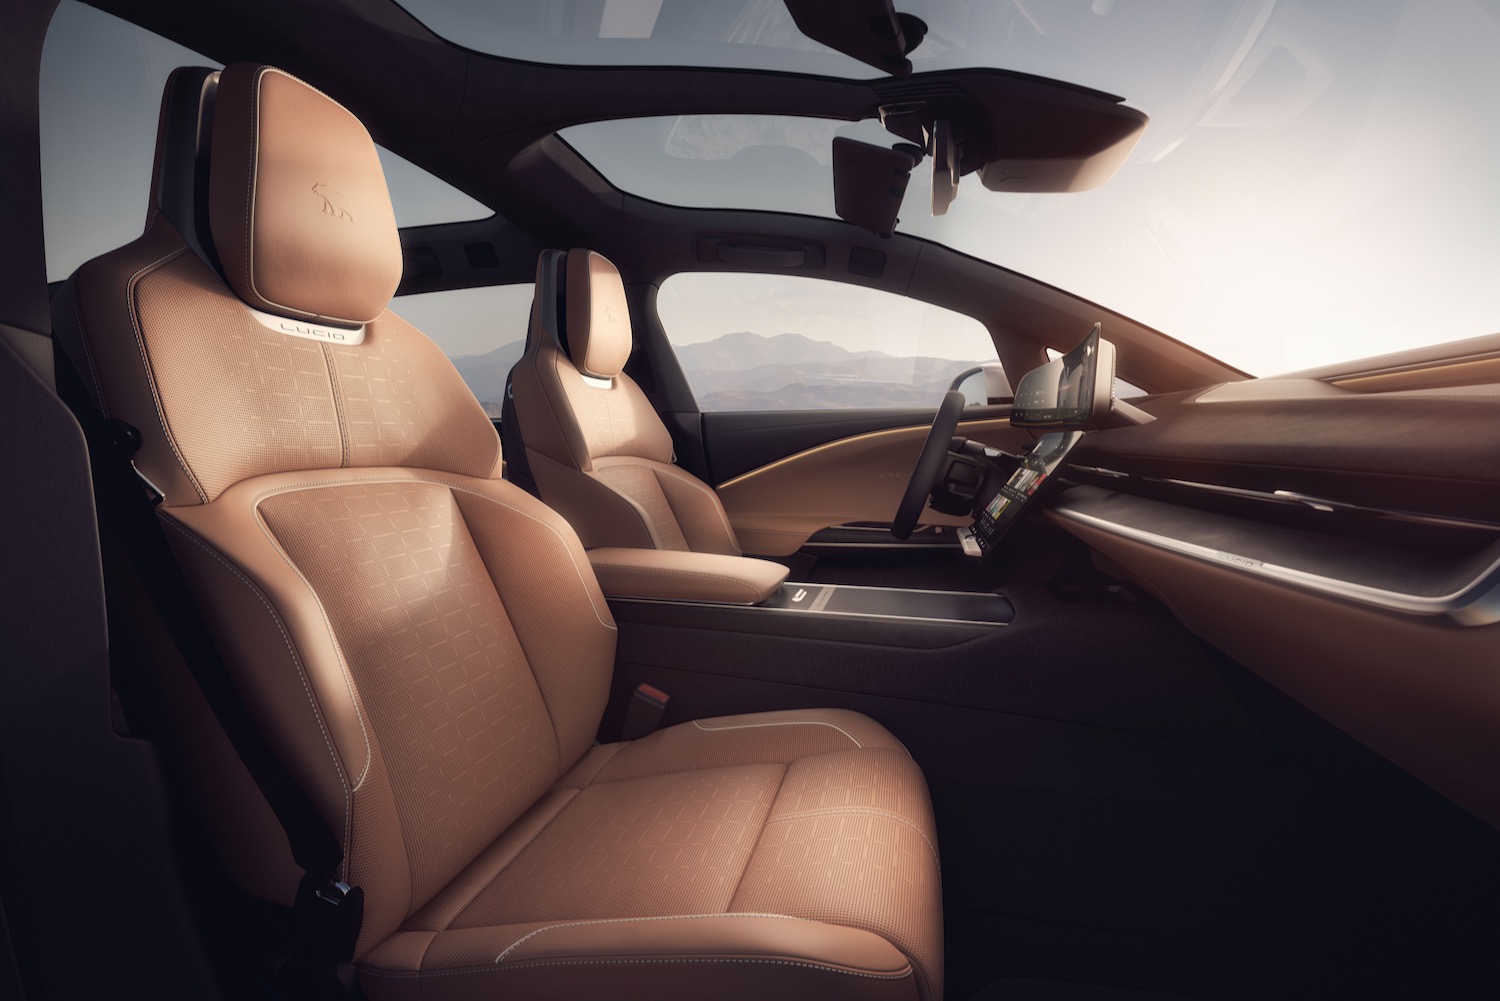 A Lucid Gravity's front seats.